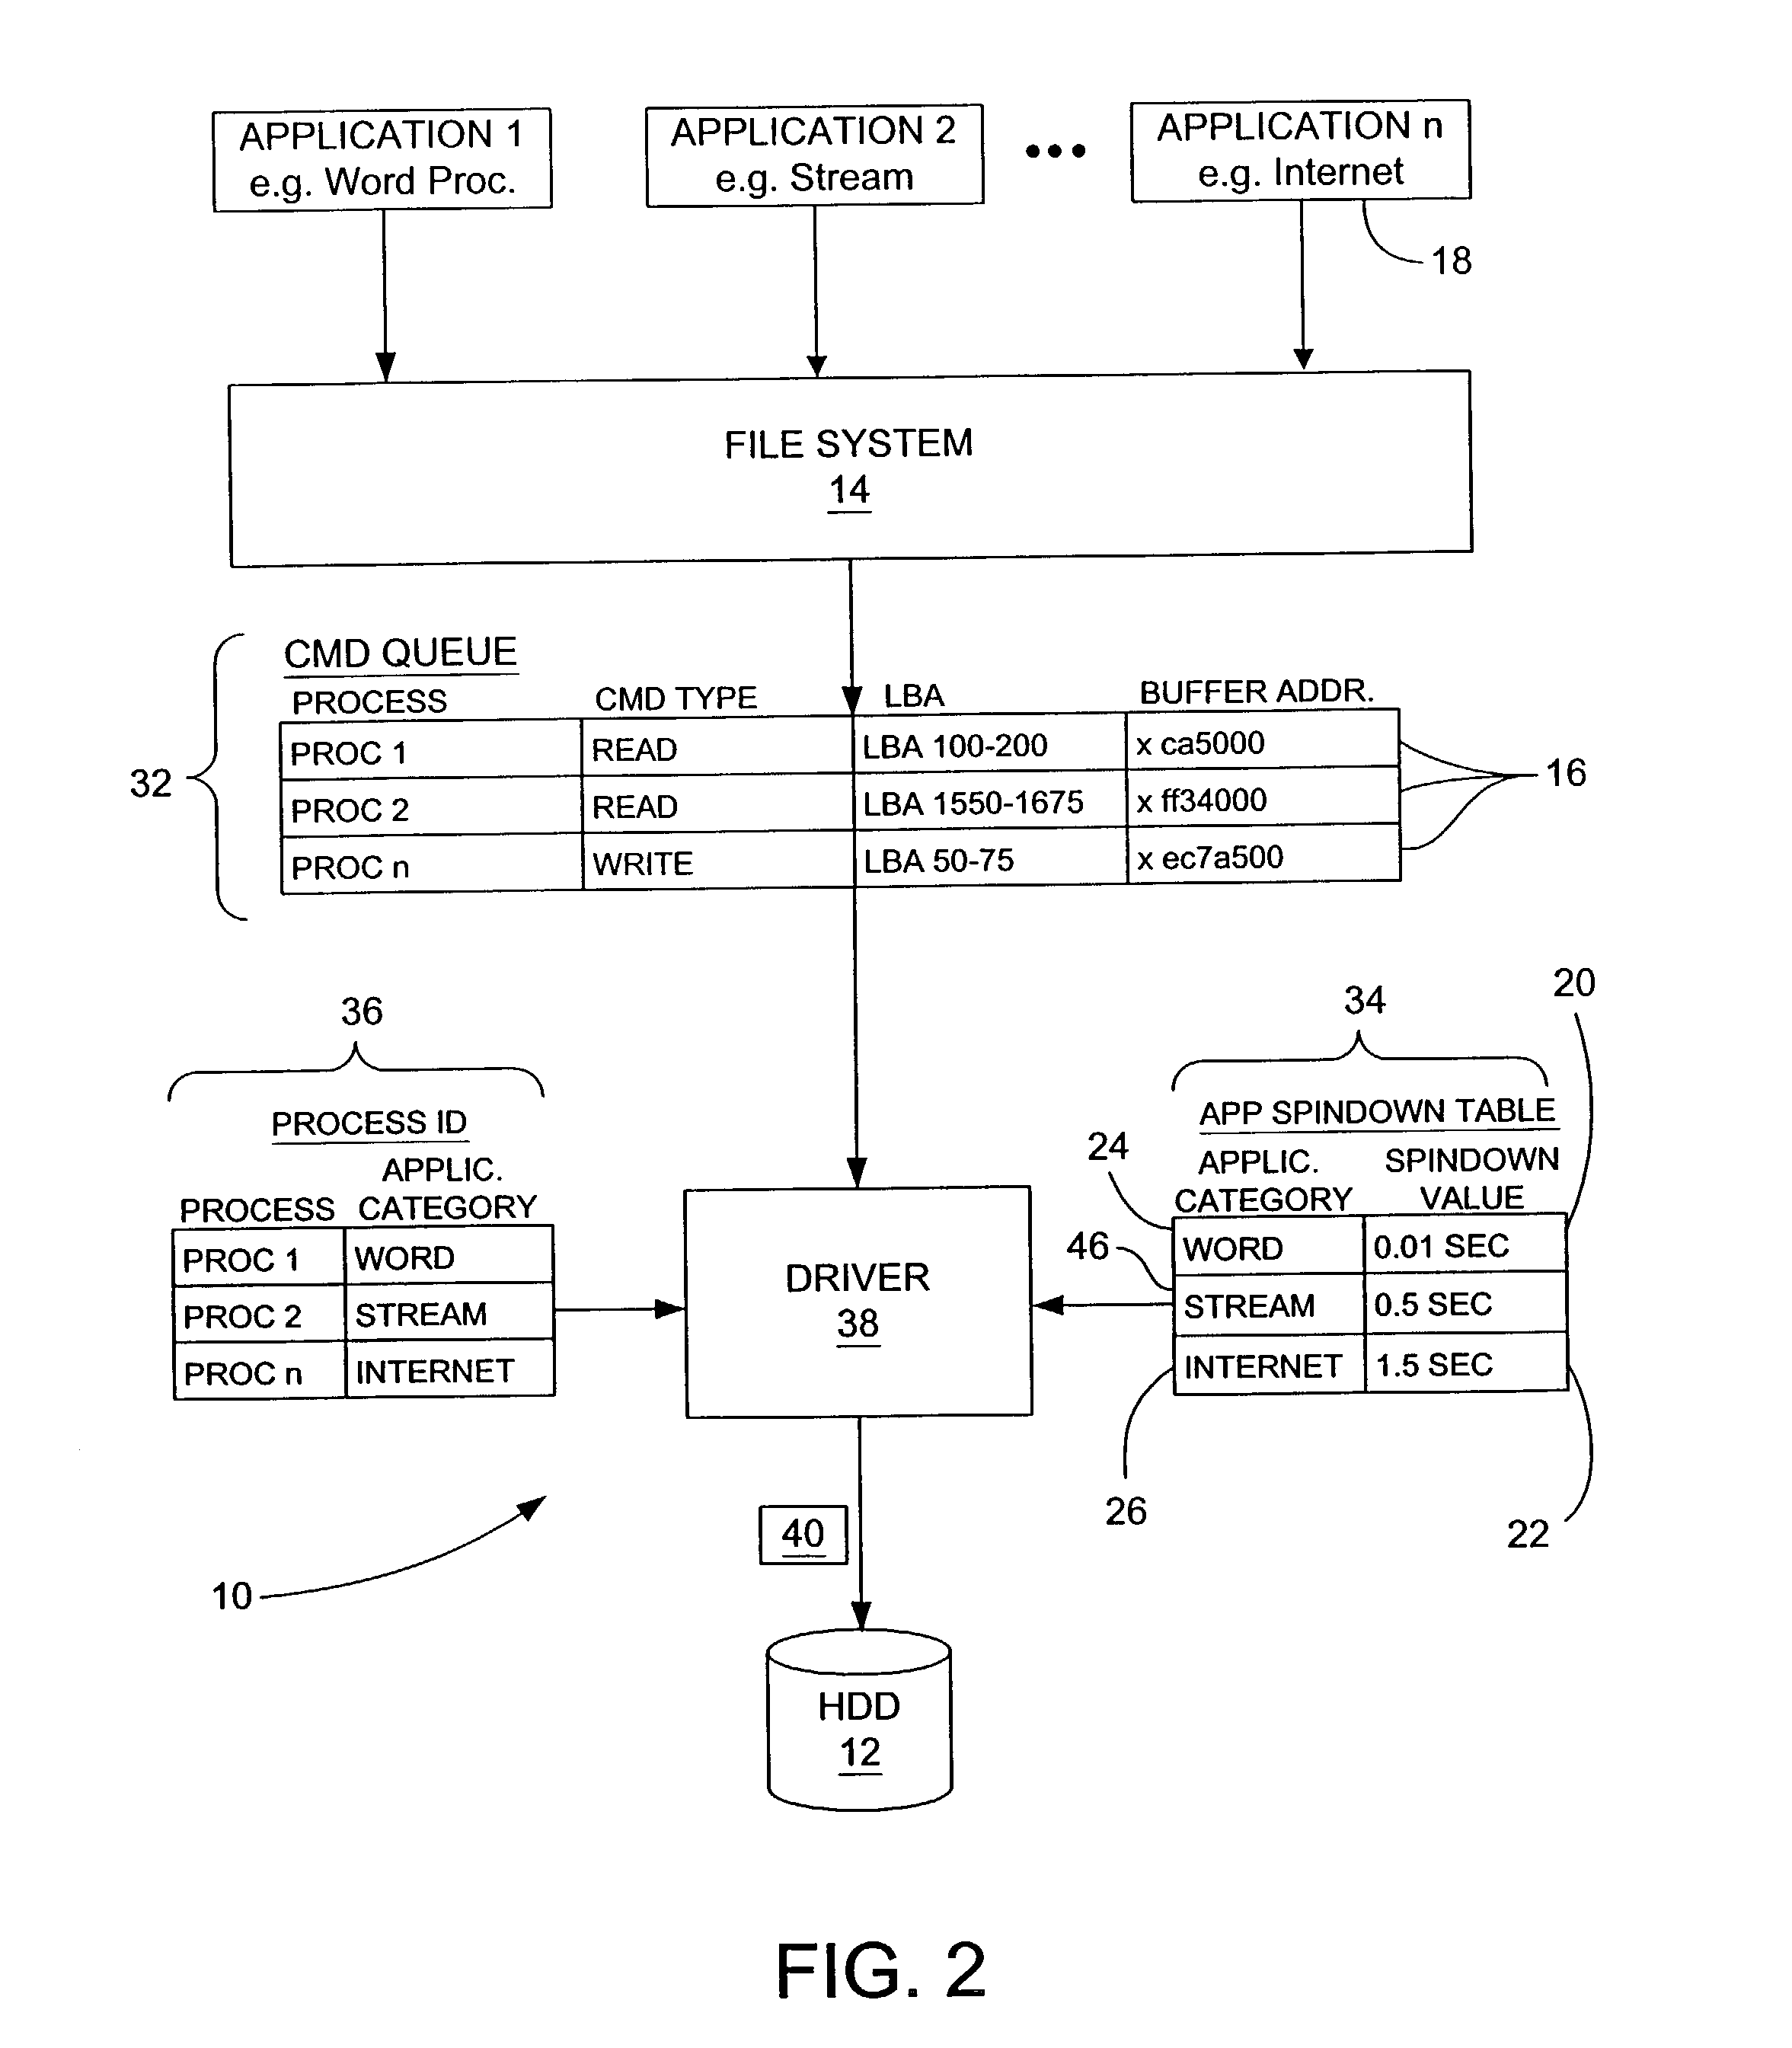 Method for setting a power operating mode transition interval of a disk drive in a mobile device based on application category